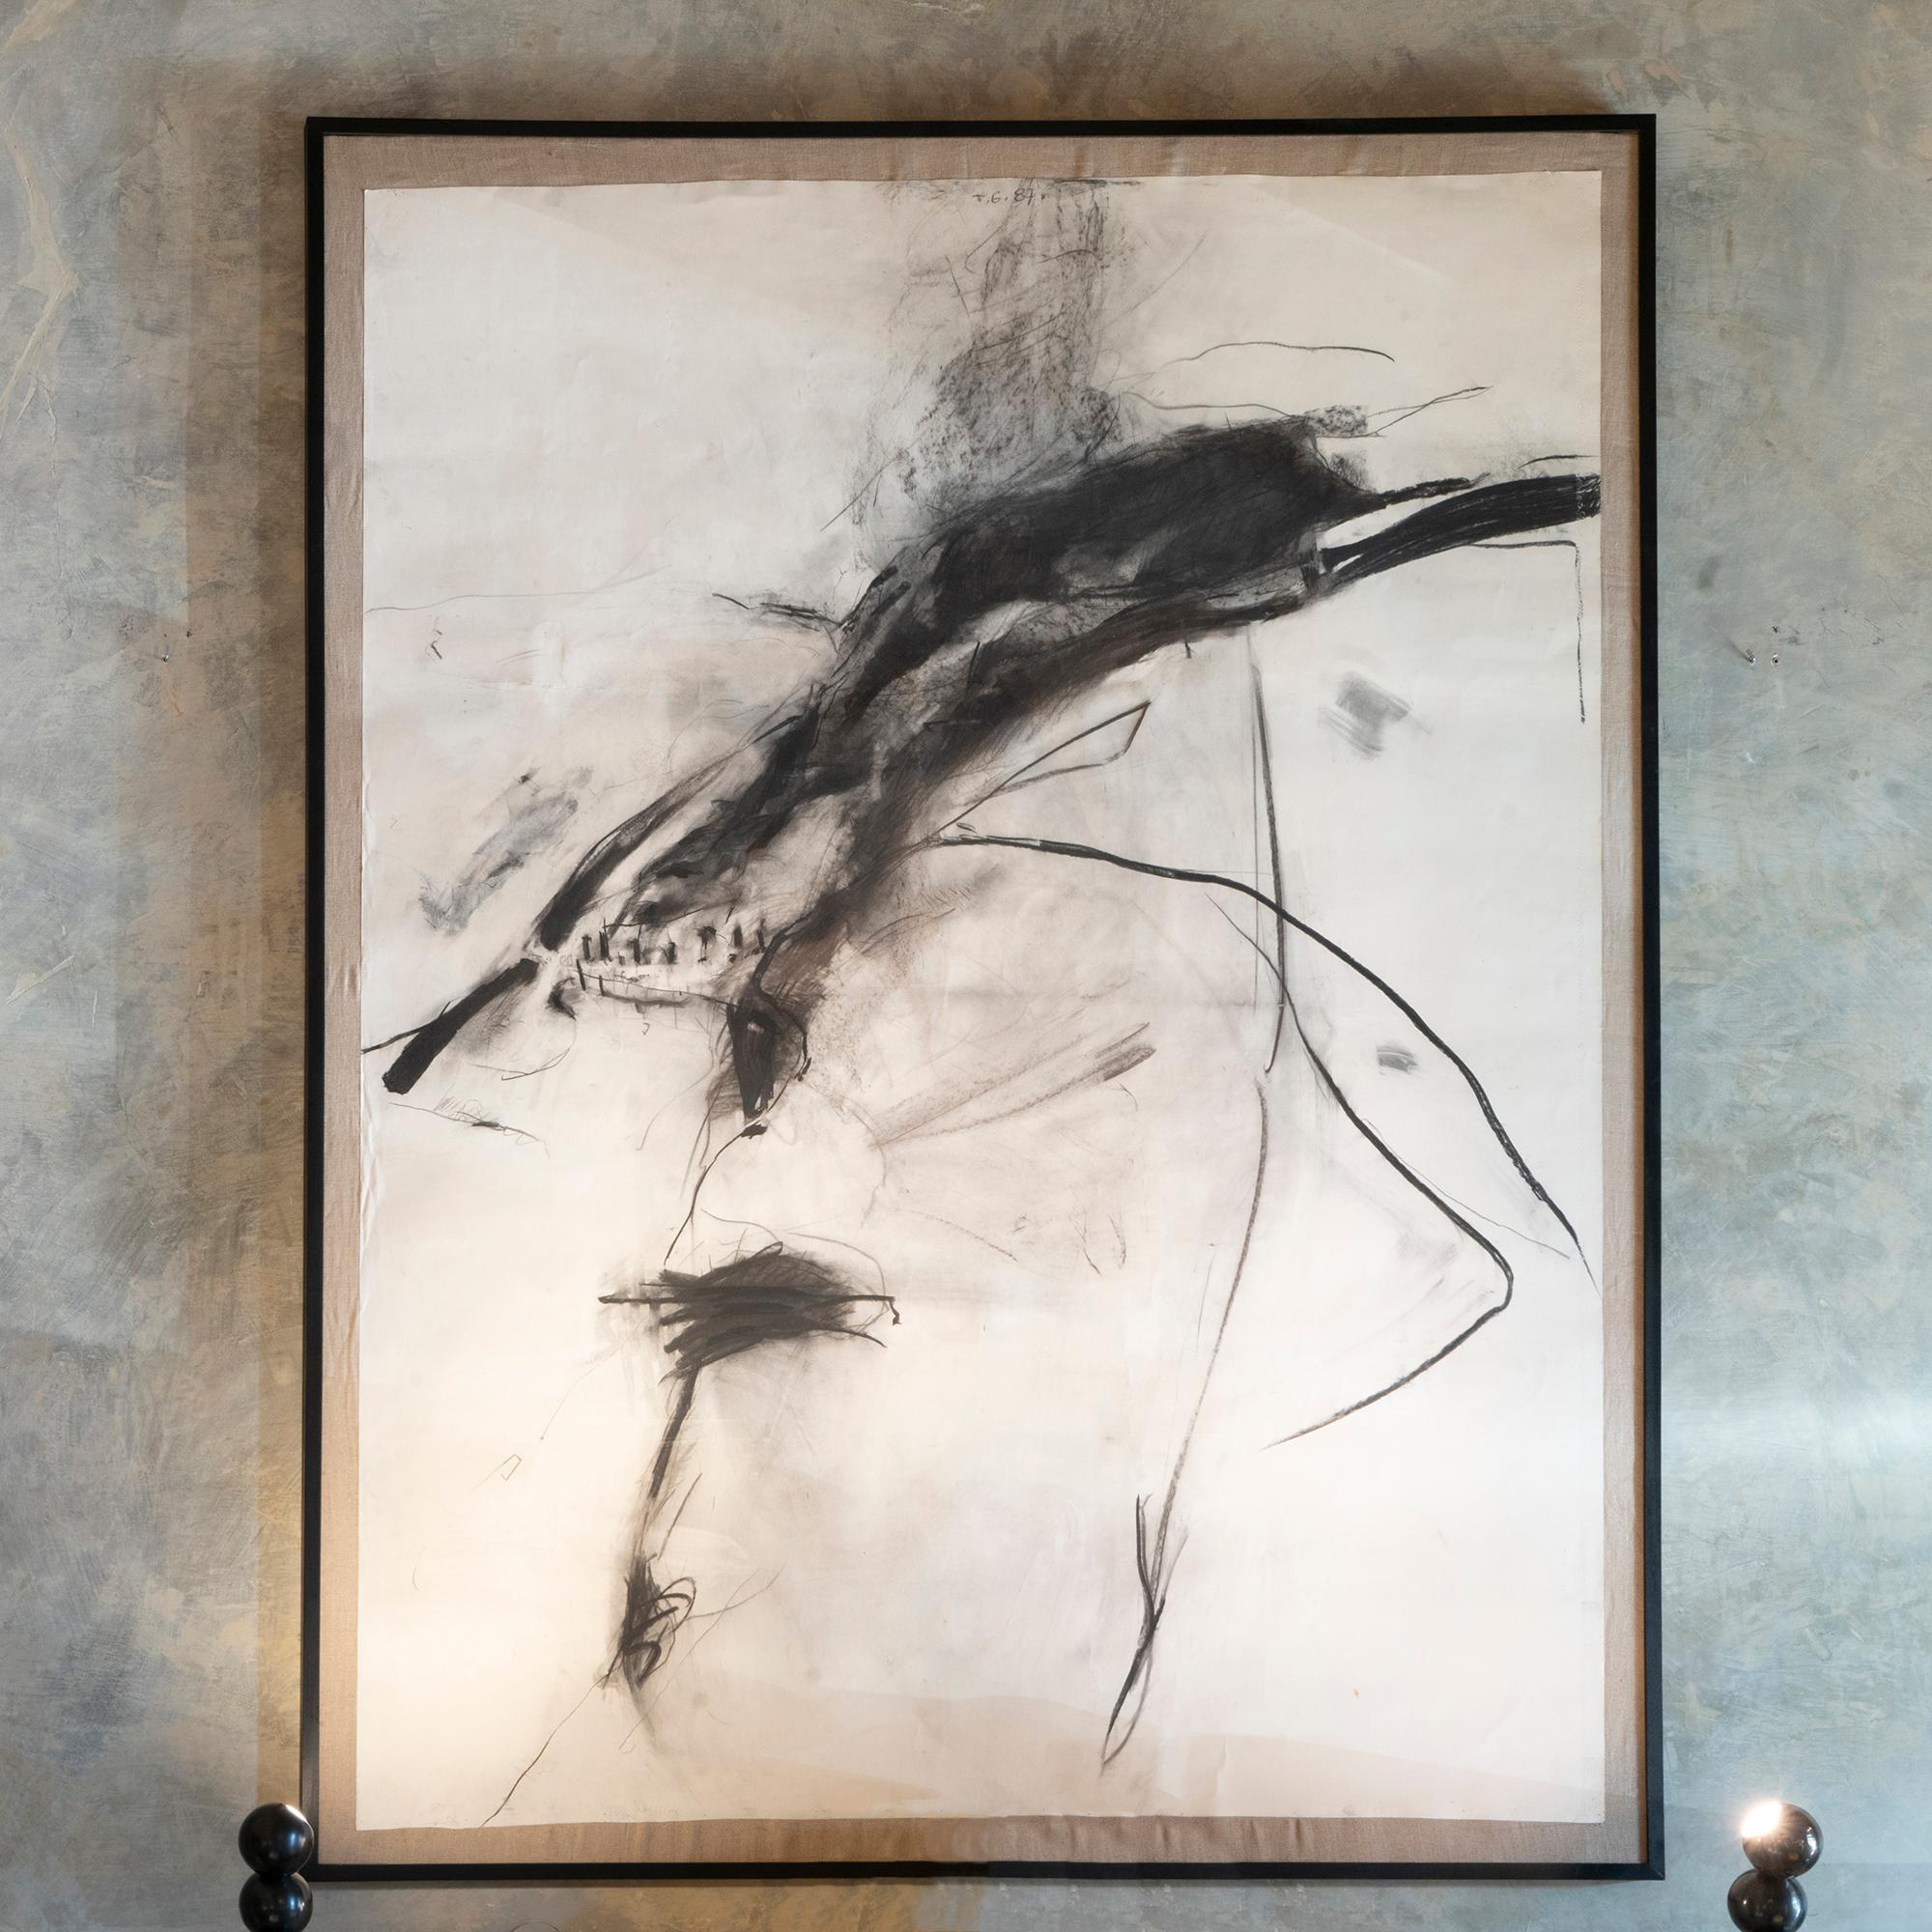 Abstract charcoal work on parchment paper from the Steinback Malmedy paper mill, mounted on juta fabric, black wood hand painted frame, artist unknown signed with initials TG 87, Belgium.